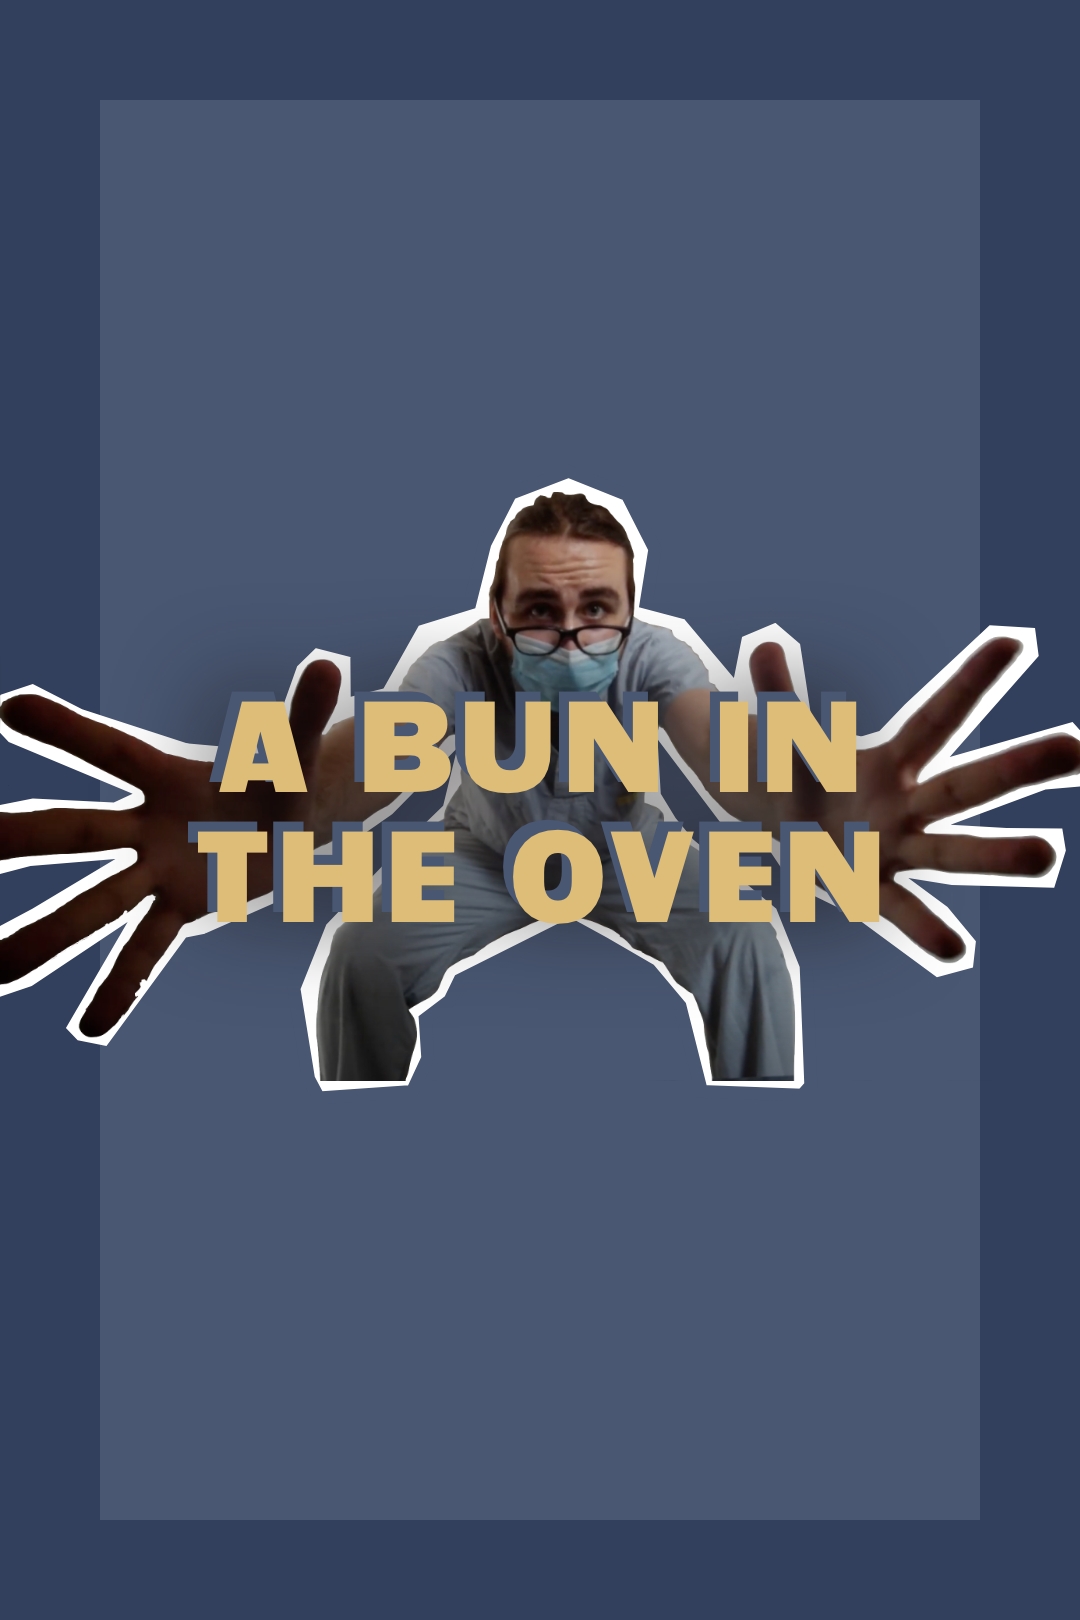 Poster for the film "A Bun in the Oven"